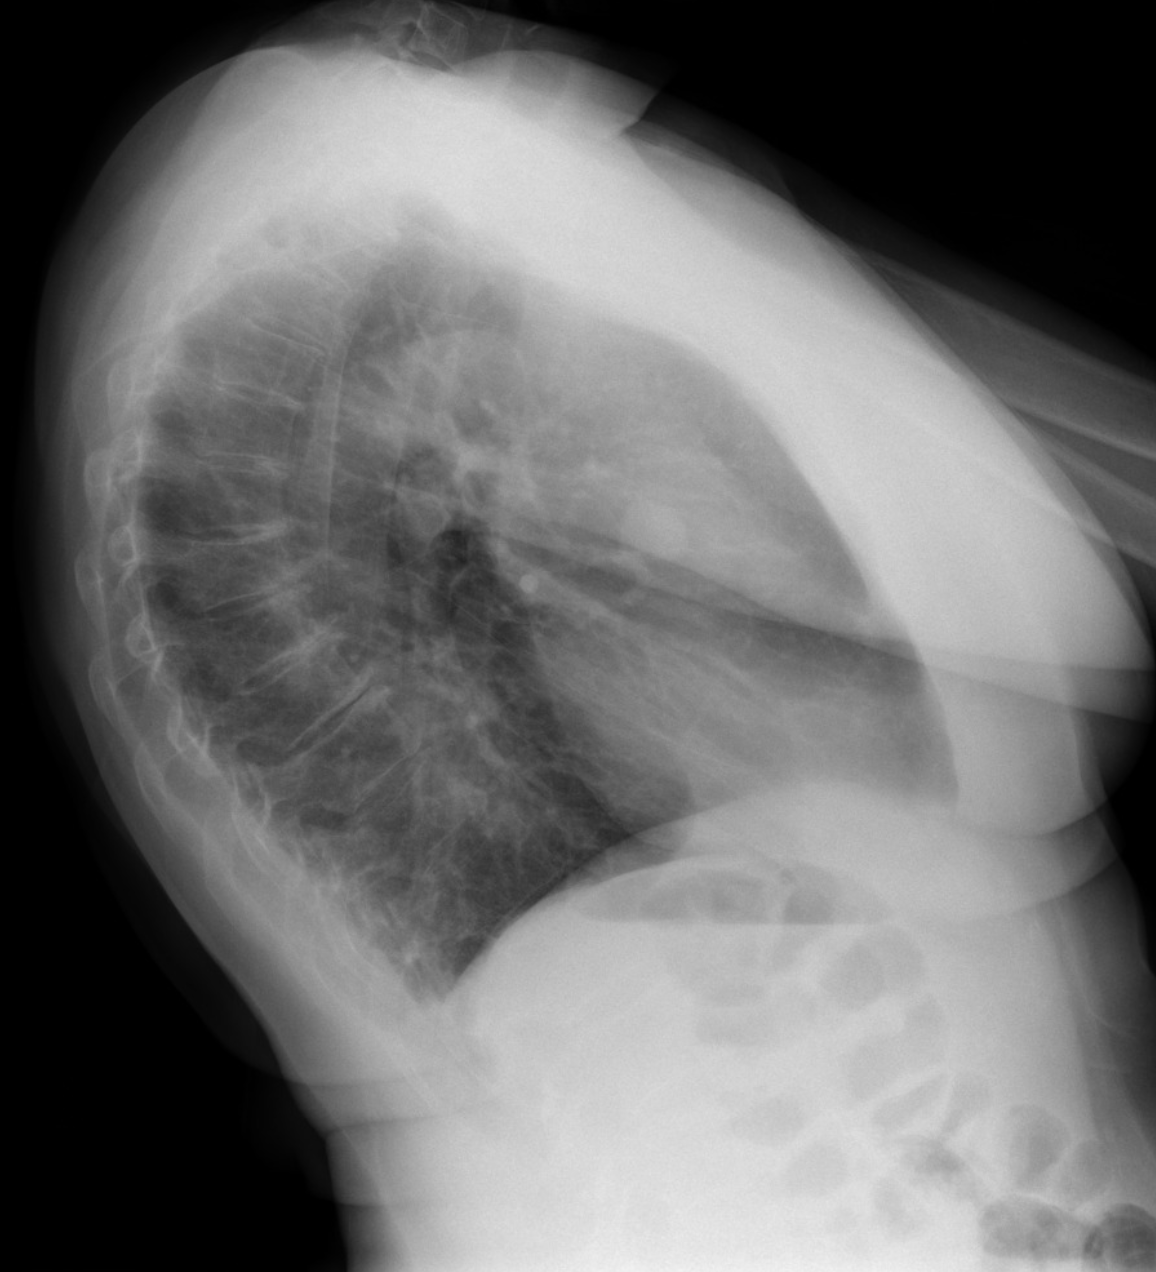 Lateral chest X-ray (CXR) shows a well circumscribed soft tissue attenuation lesion overlapping the heart